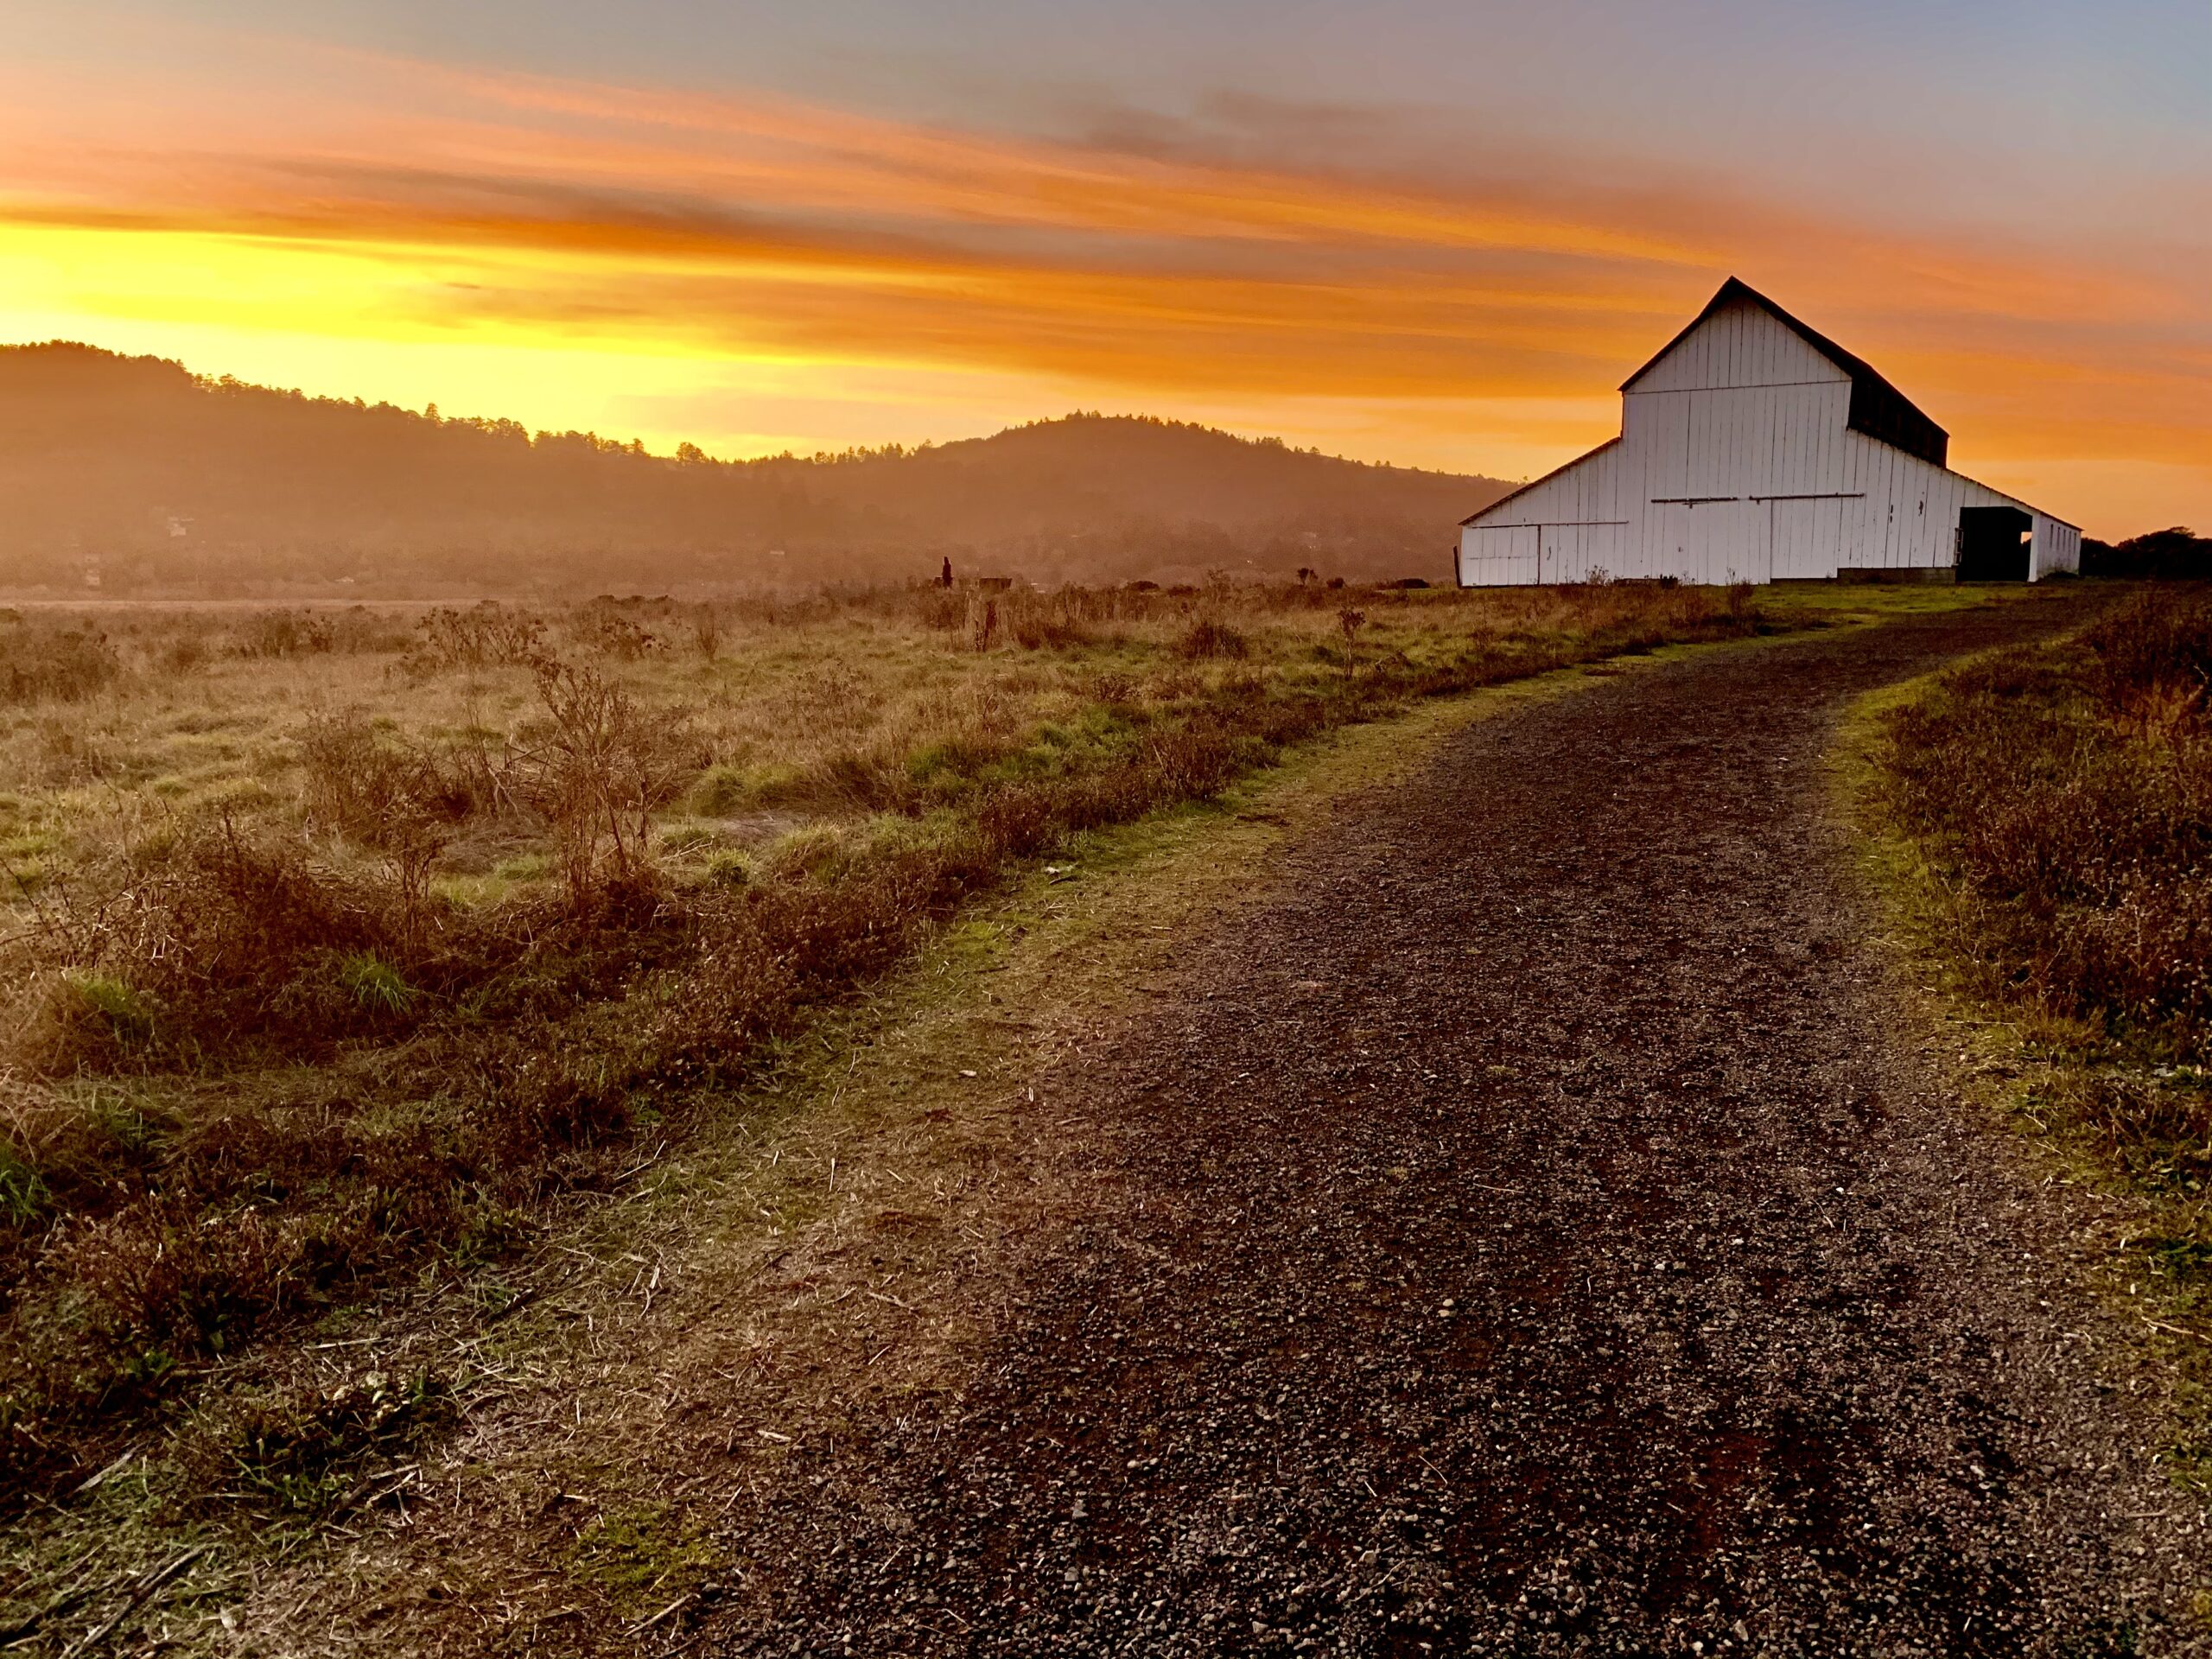 A white barn sits on a dirt road at sunset.